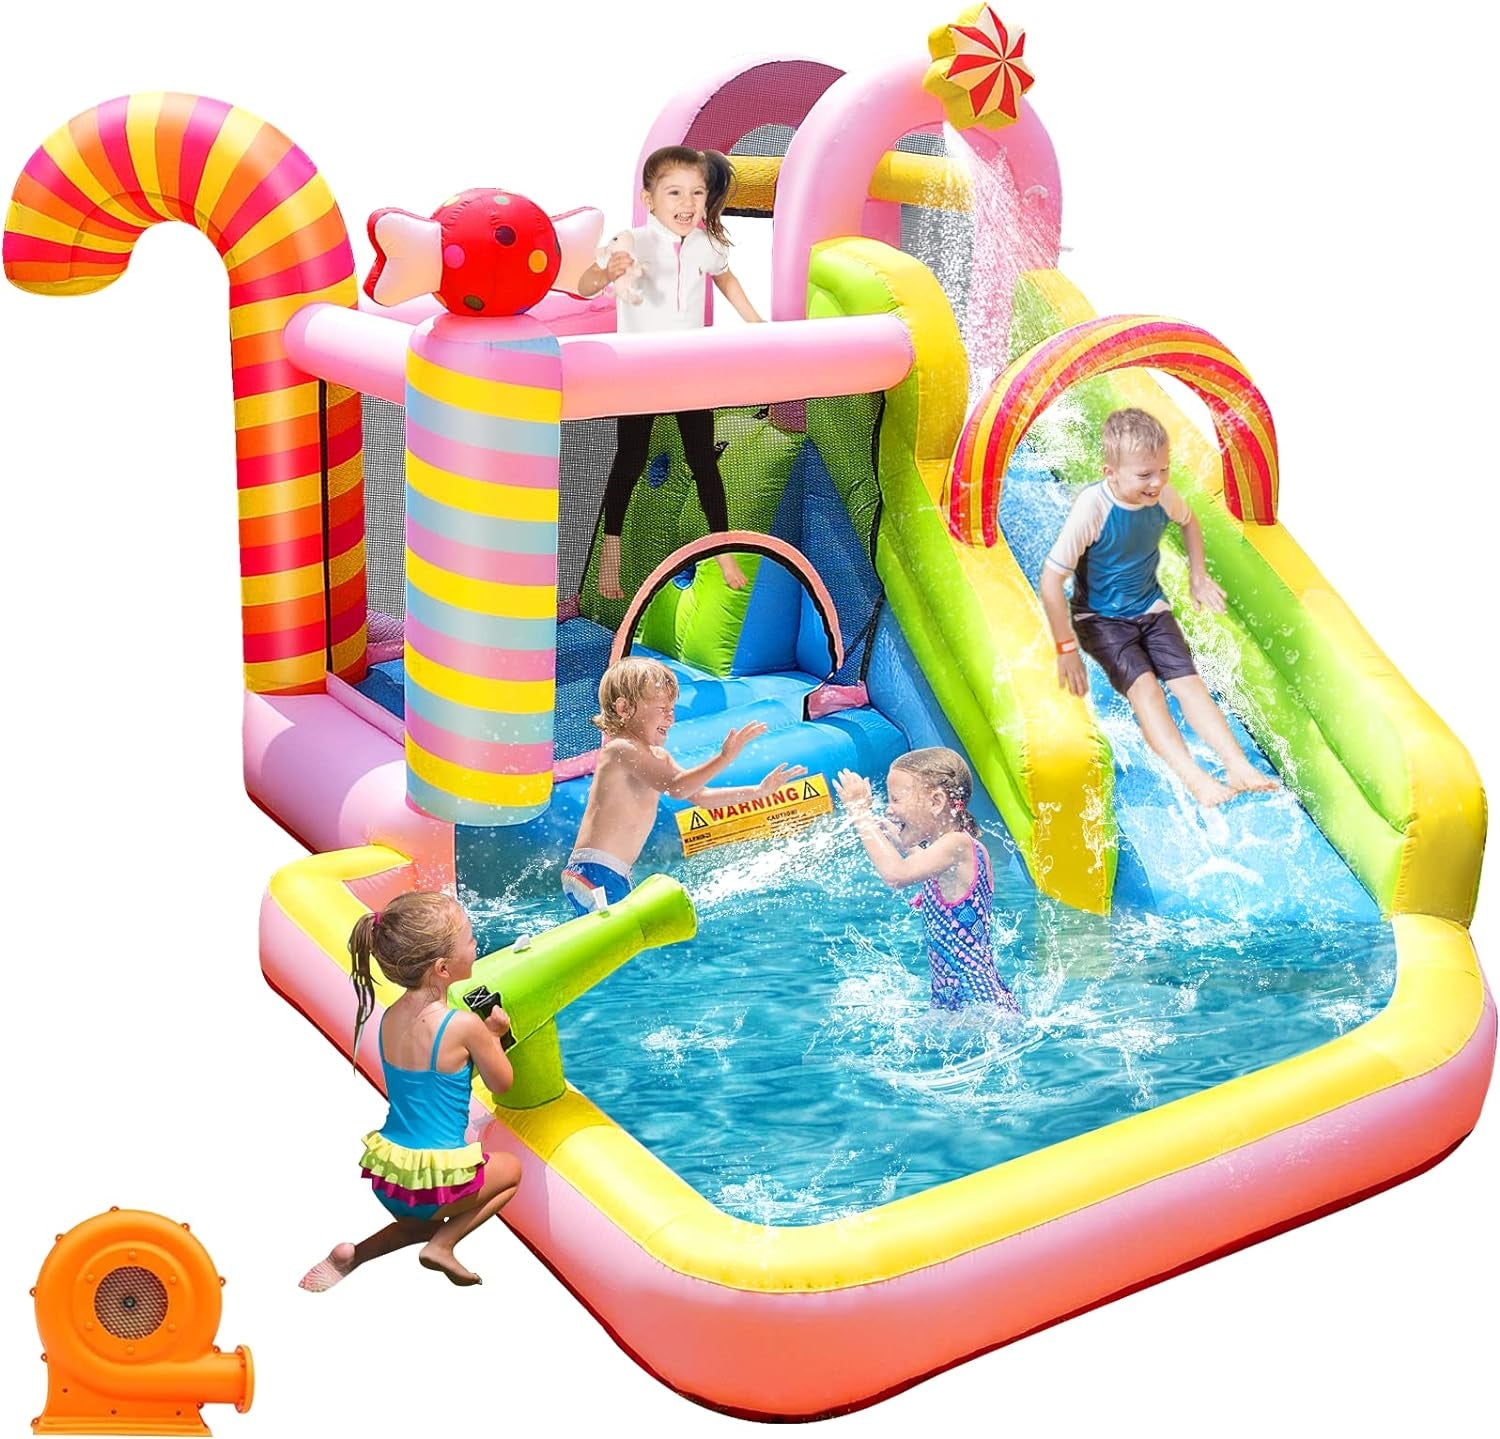 Inflatable Bounce House Water Slide, 6 in 1 Sweet Candy Water Park, Wet Dry Combo Bouncy Castle with 450W Blower, Splash Pool, Water Slide for Kids and Adults Backyard Party Gifts